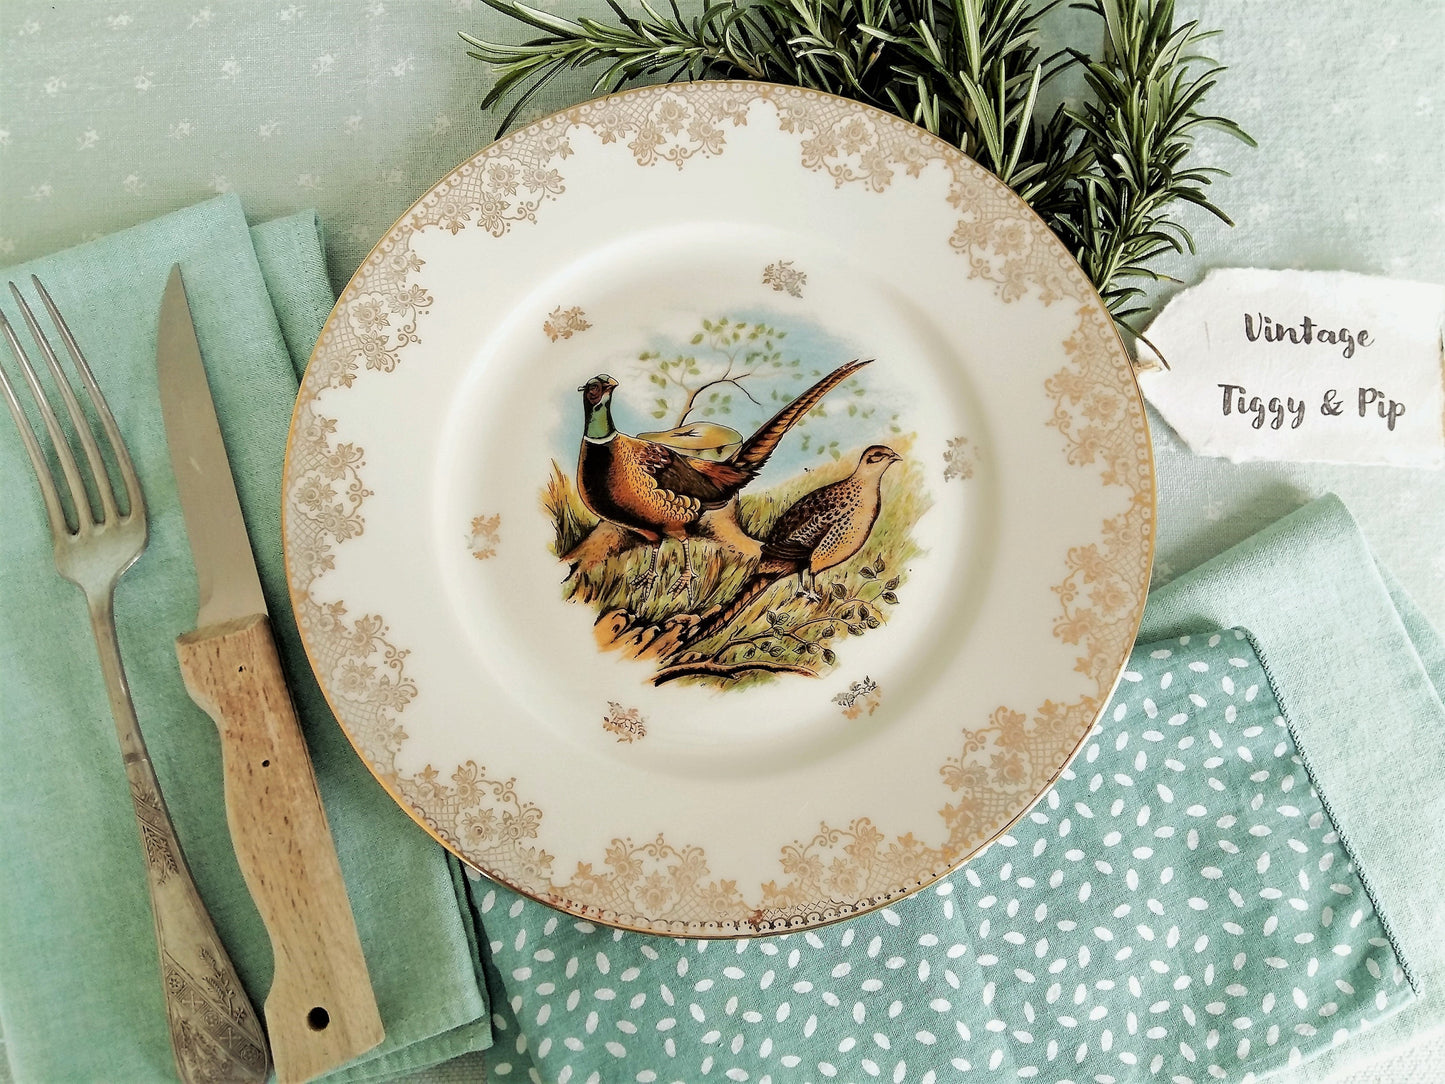 Six Limoges Game Dinner Plates. from Tiggy & Pip - €168.00! Shop now at Tiggy and Pip